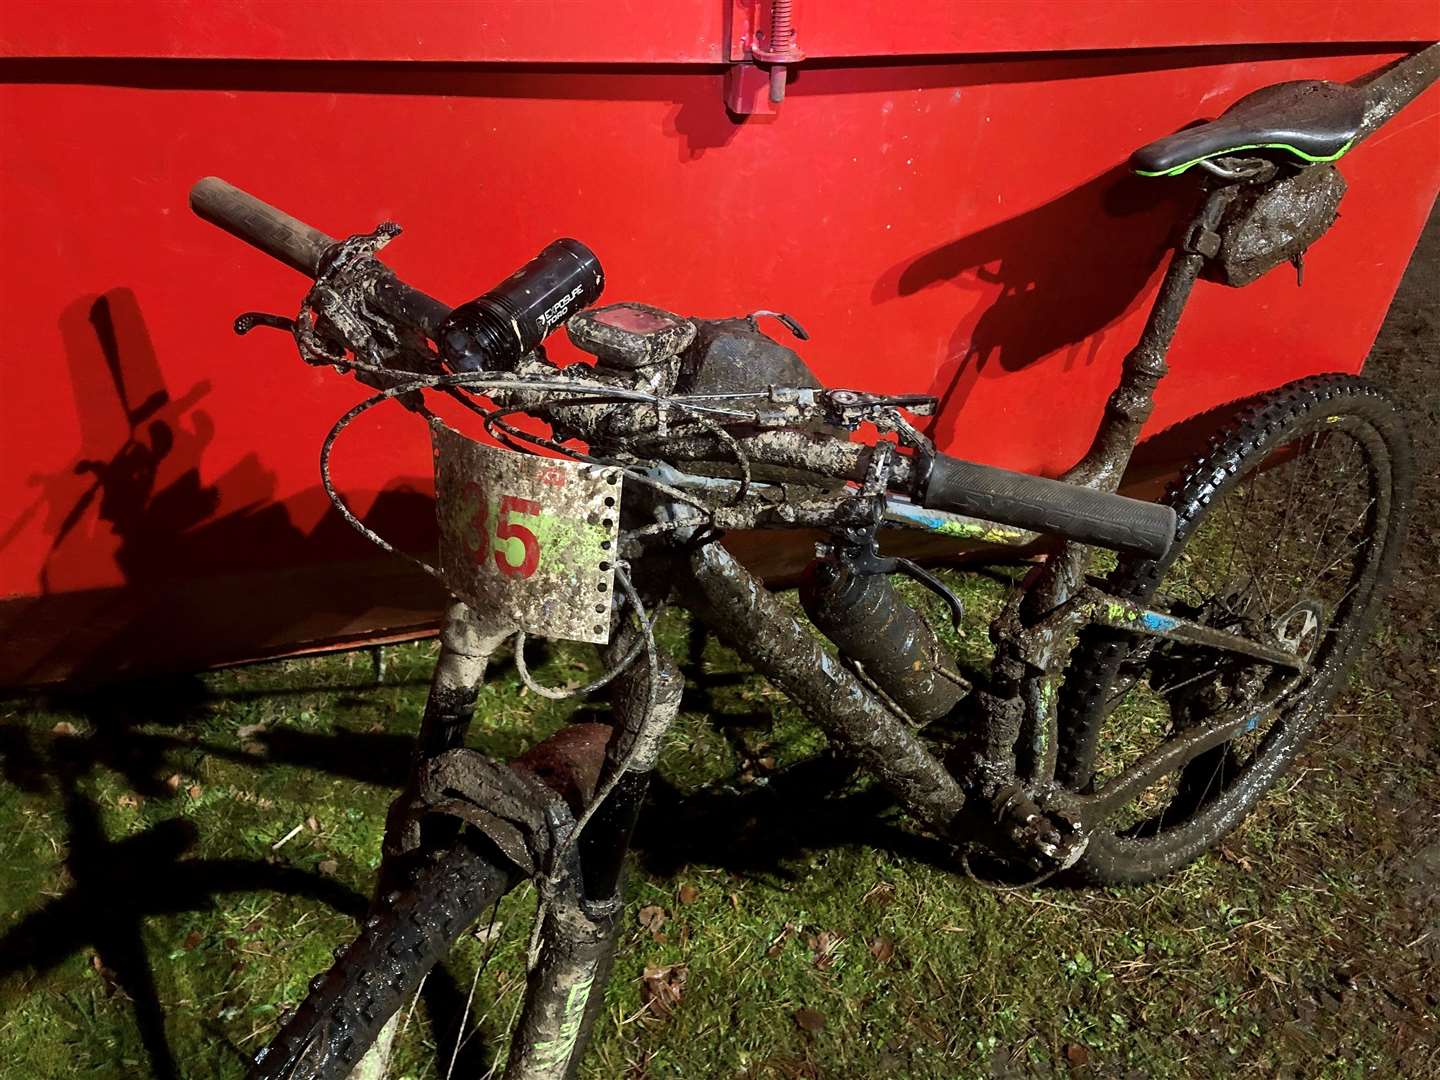 The mudfest of an event can play havoc with the bike!